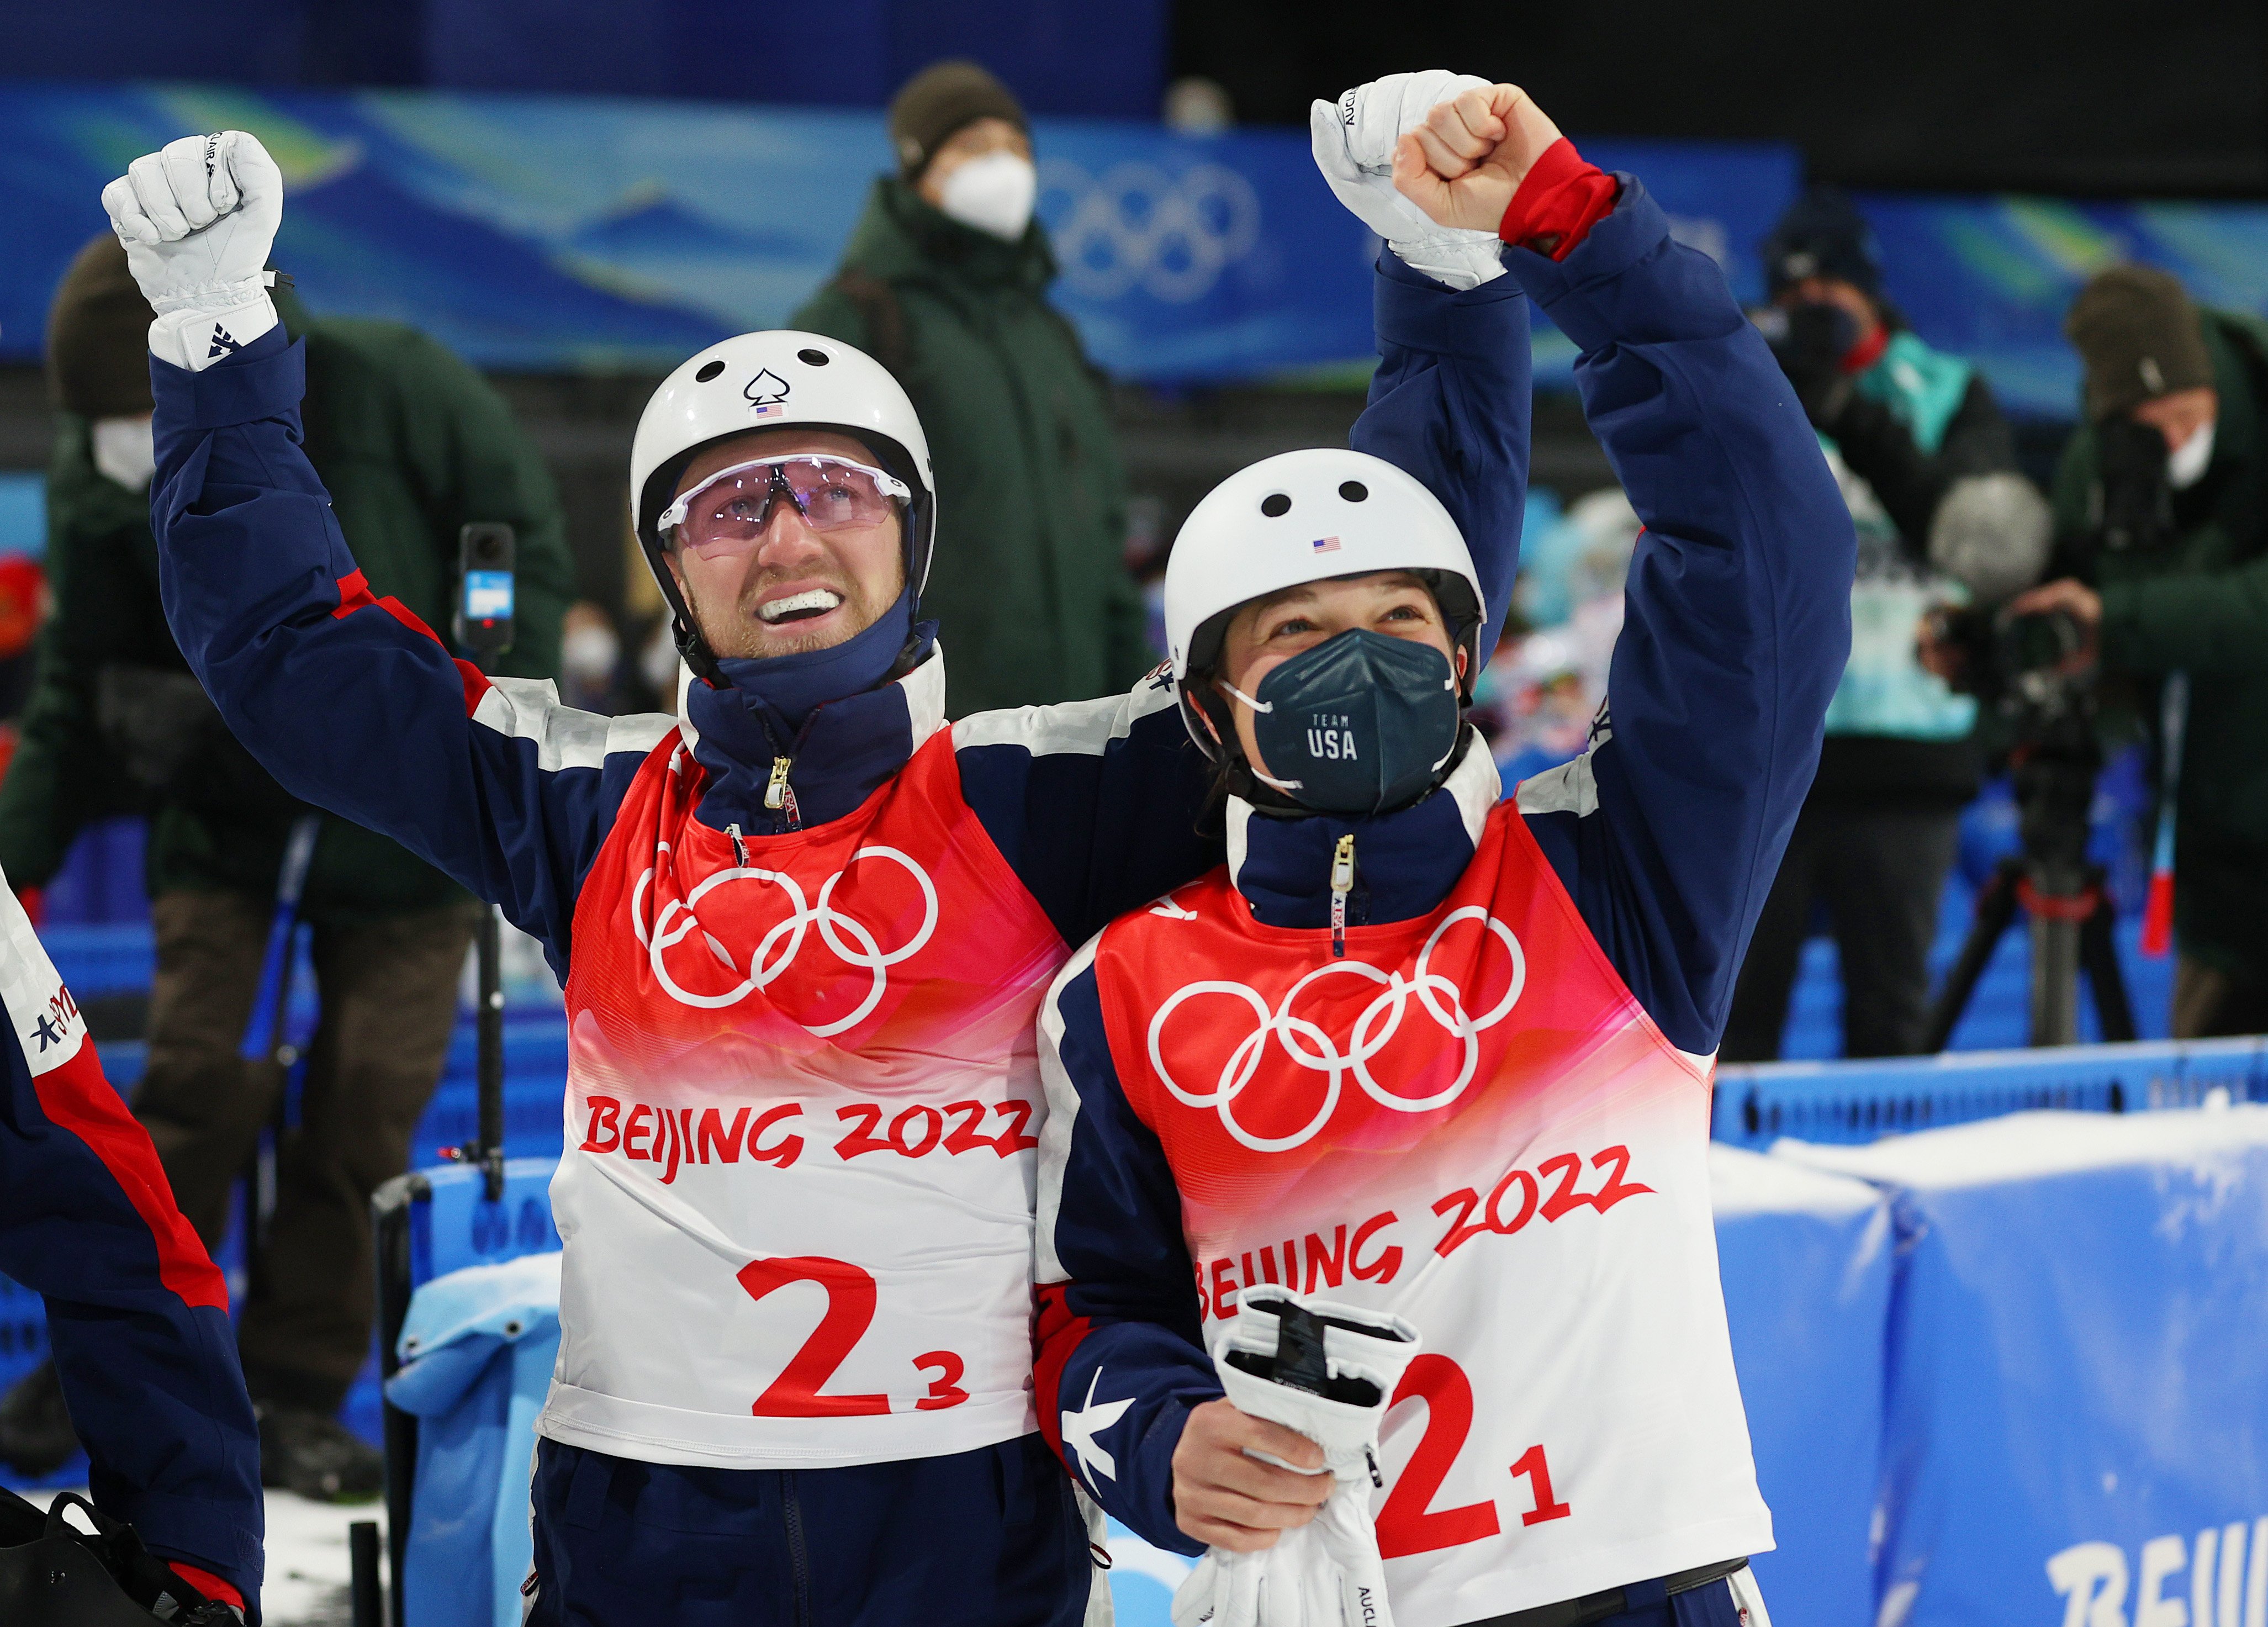 Justin Schoenefeld and Ashley Caldwell celebrating during the Freestyle Skiing Mixed Team Aerials on Day 6 of the 2022 Winter Olympics